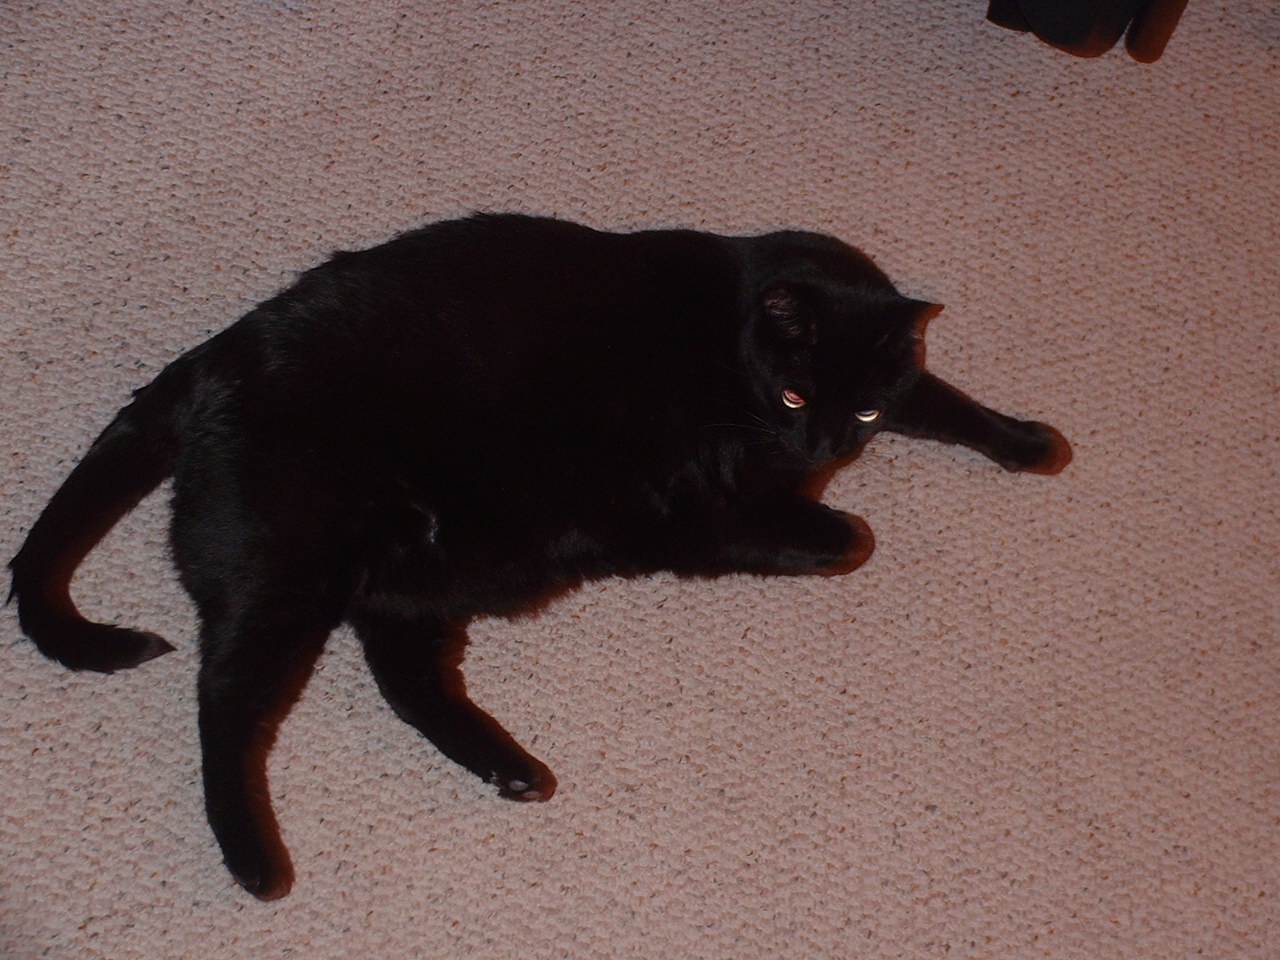 a cat with its eyes closed is lying on the floor